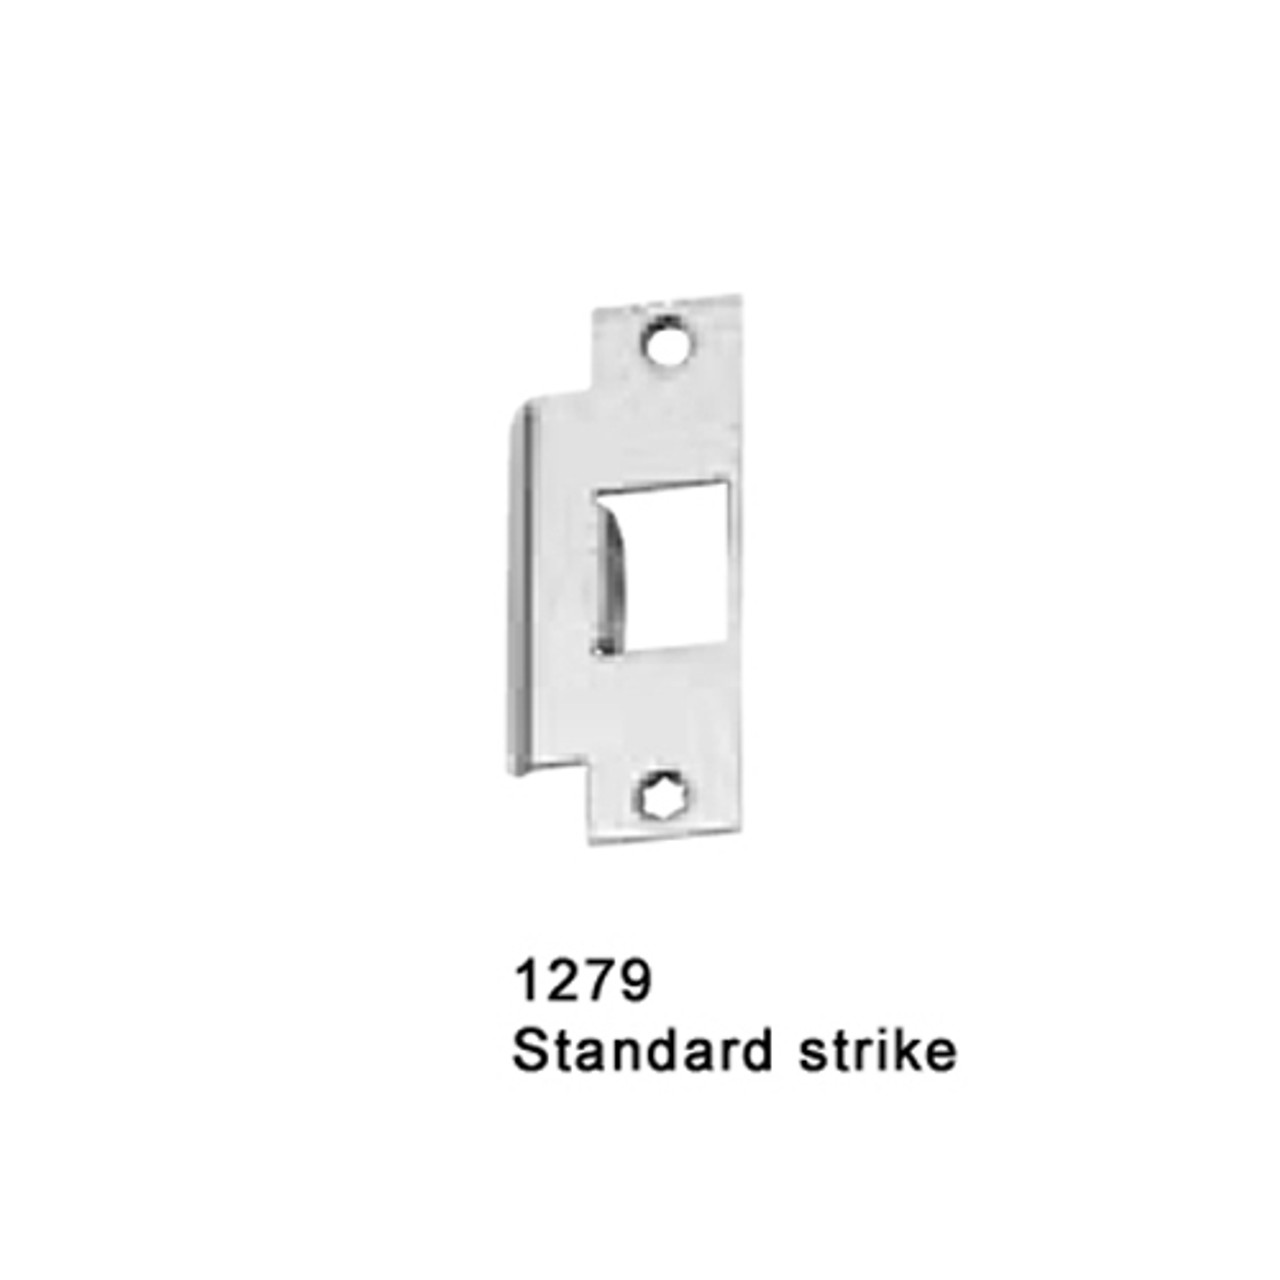 CD25-M-TP-BE-US28-3-LHR Falcon 25 Series Mortise Lock Devices 512TP-BE Thumbpiece Trim with Blank Escutcheon in Anodized Aluminum